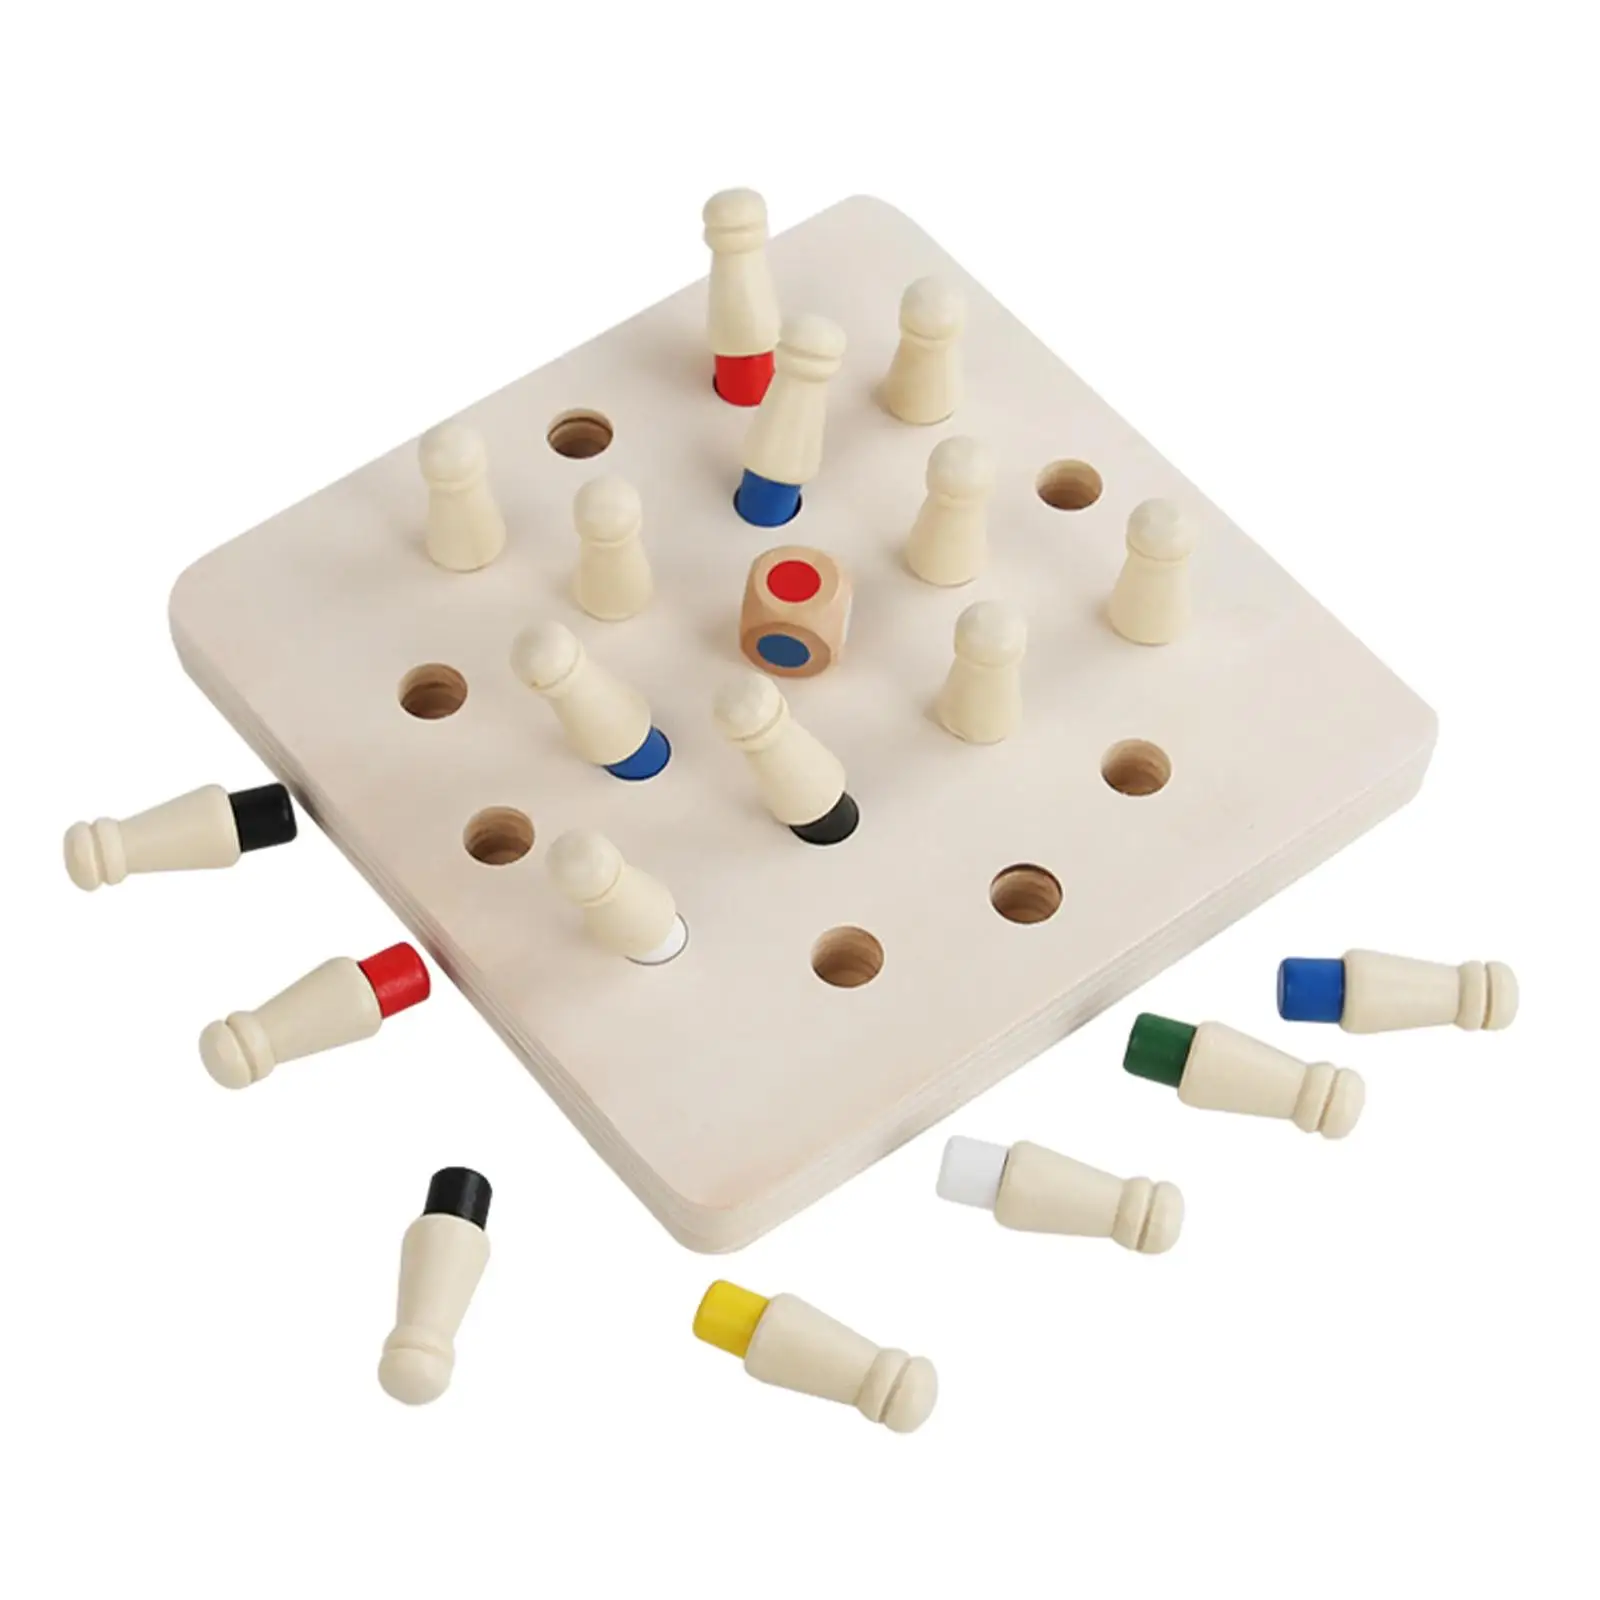 Memory Chess Toys Multi Player Early Education Toys Color Memory Matching Game for Boys Toddlers Kids Children Birthday Gifts